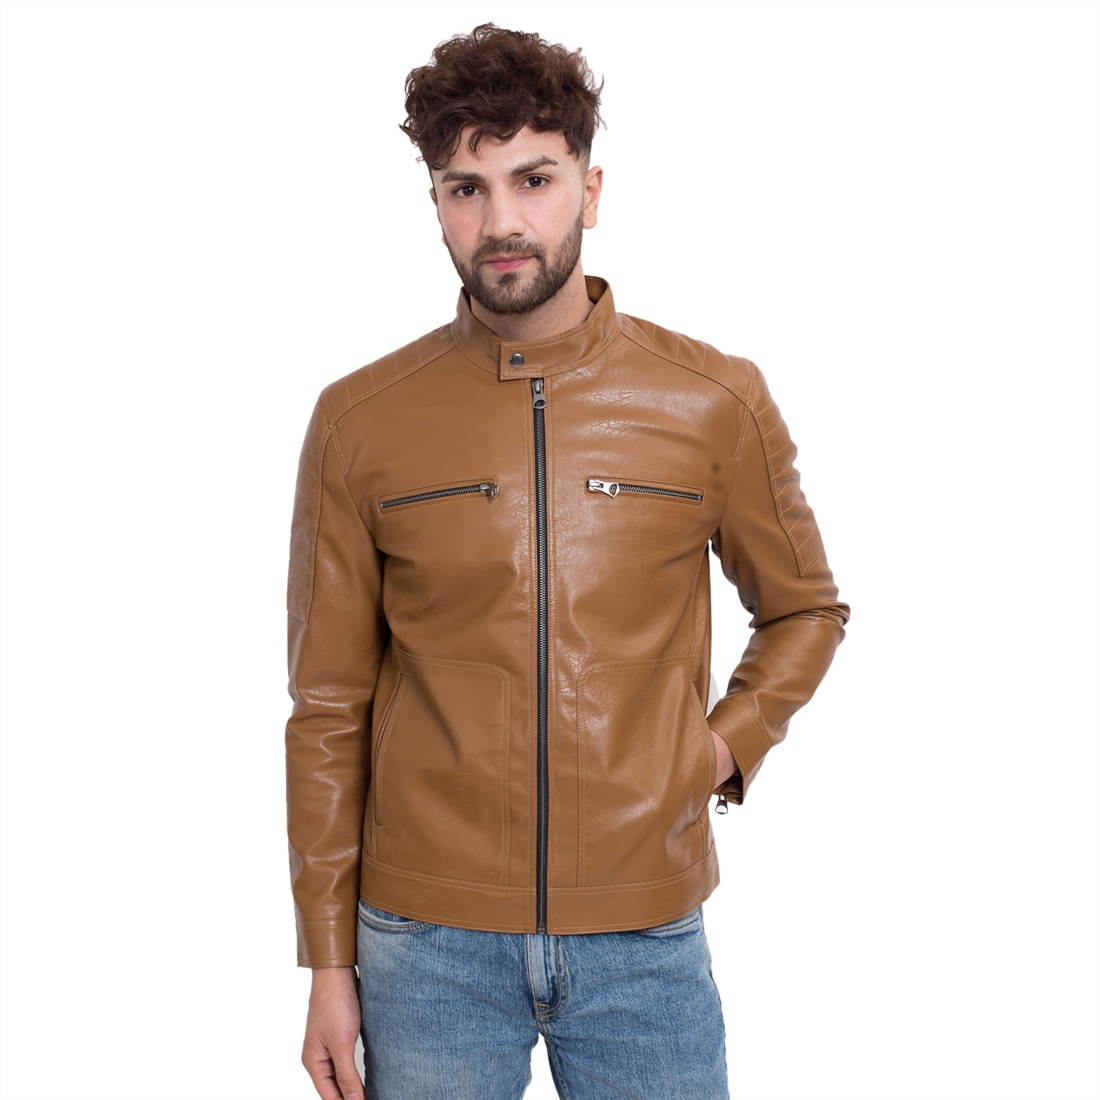 Justanned | Justanned Tawny Leather Jacket